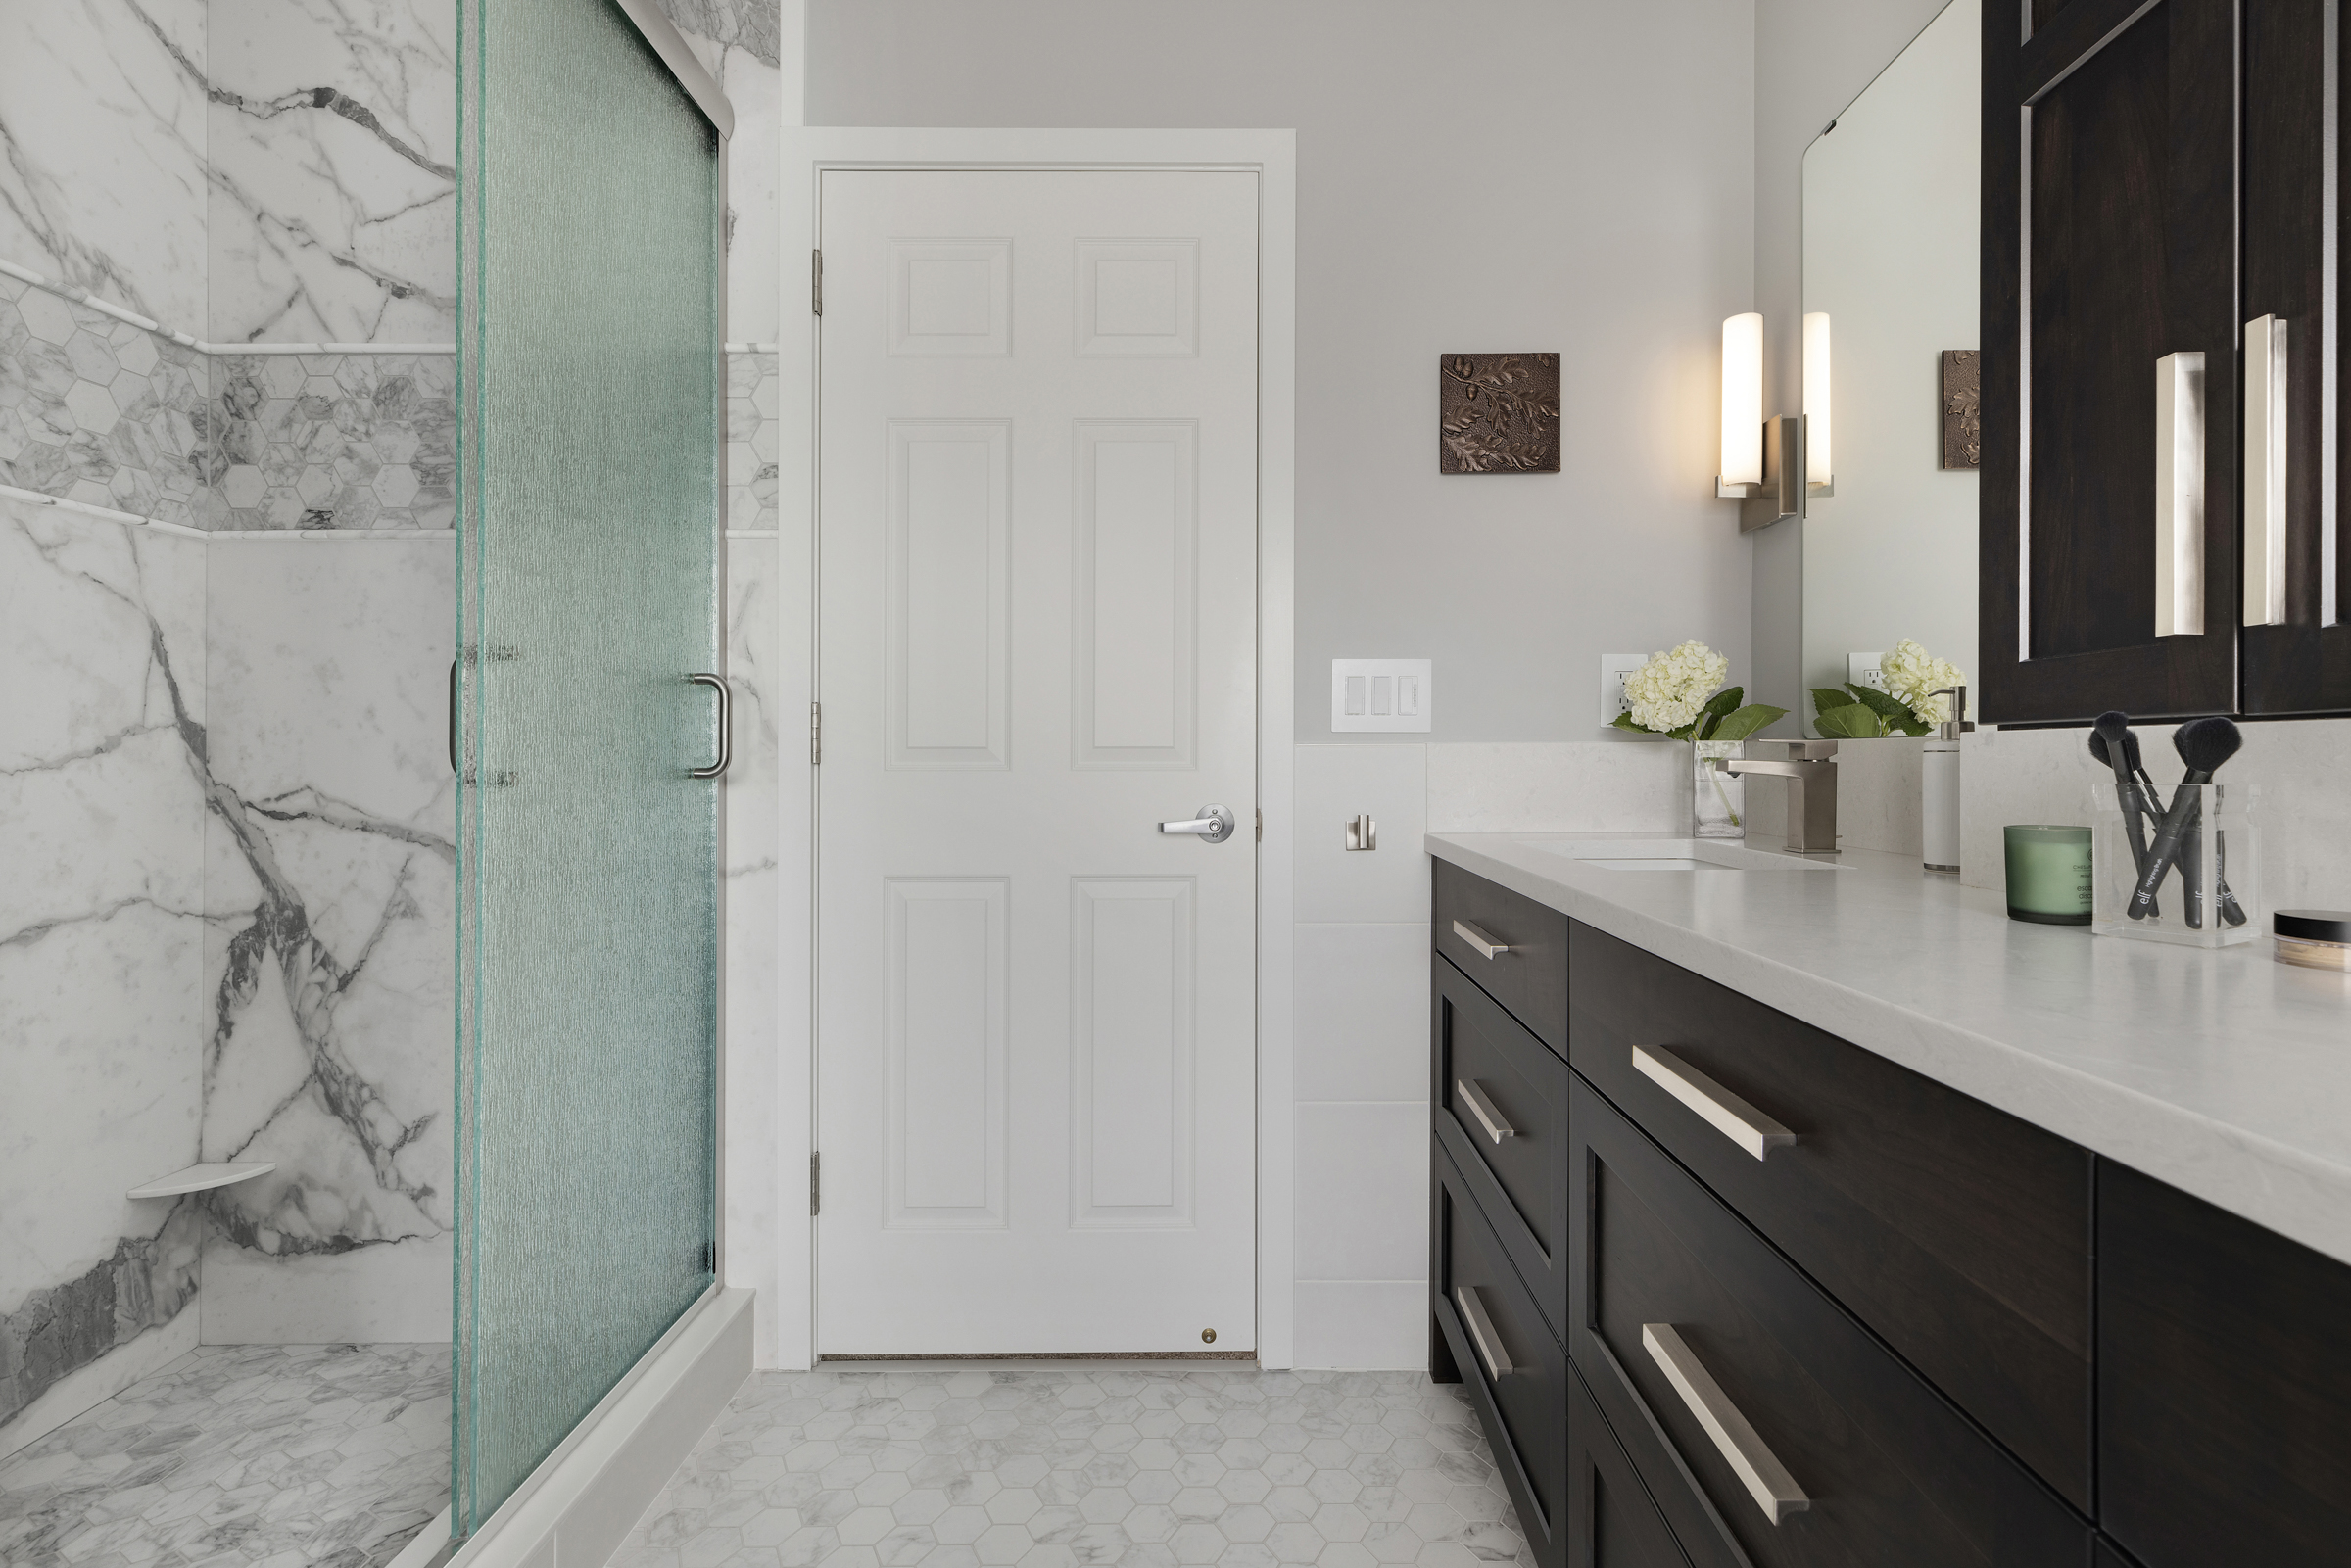 Renovated primary bathroom with large walk in shower and dark wooden vanity